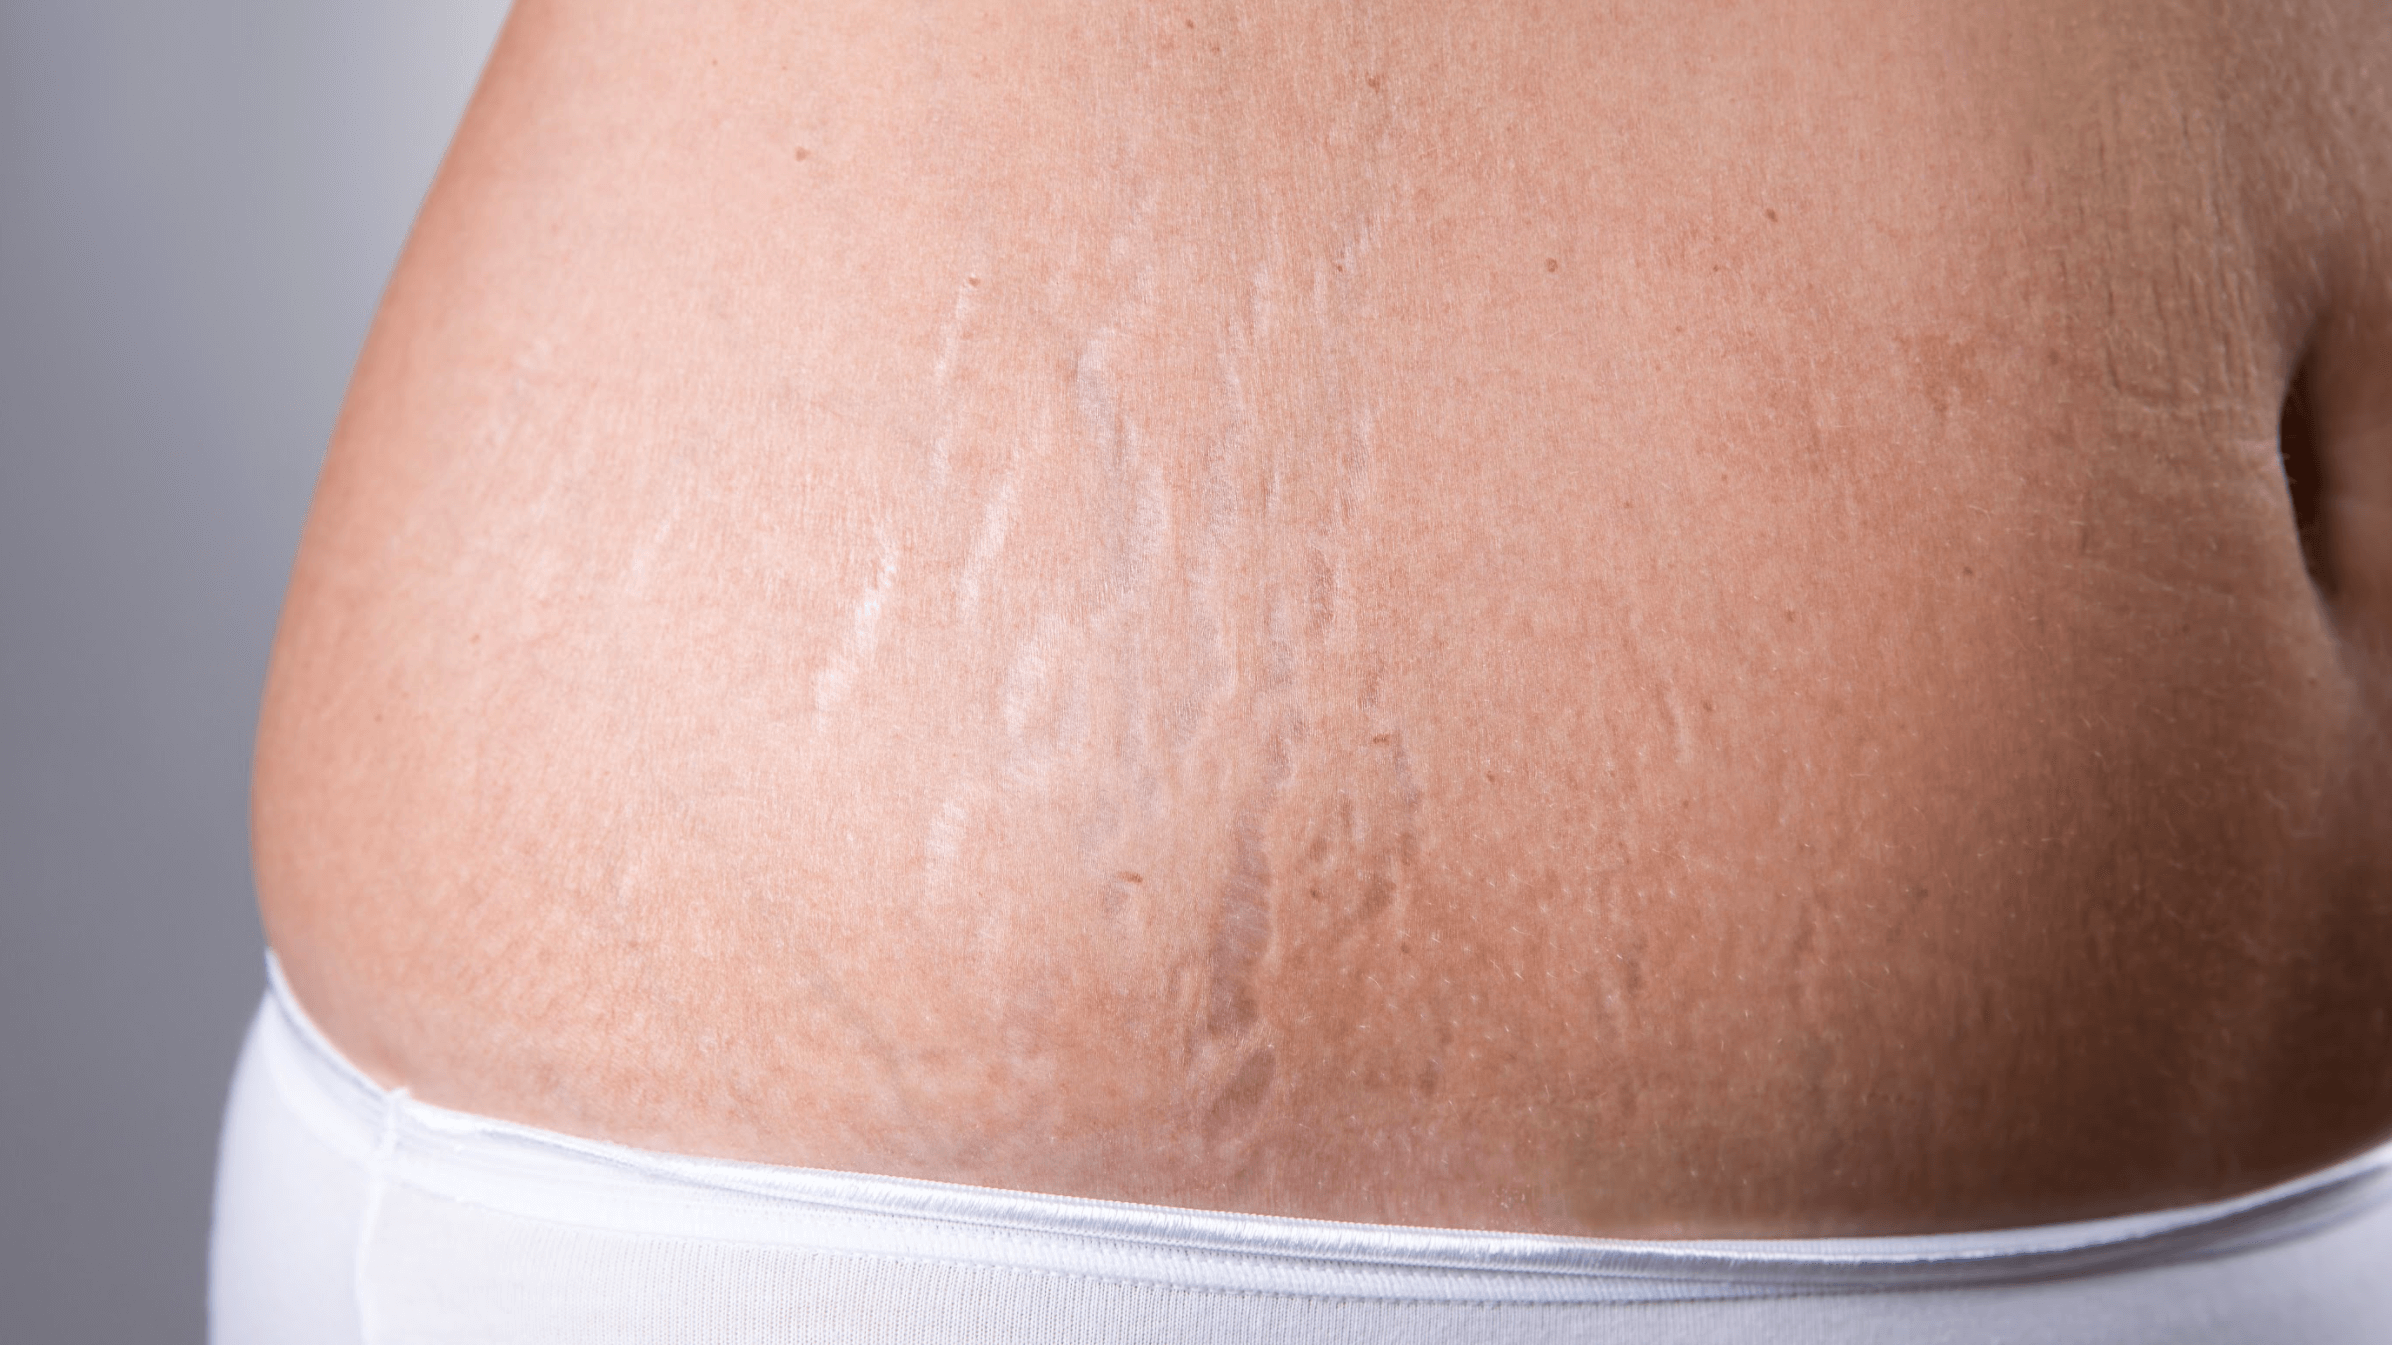 Treatment Options for Tightening Loose Skin Post-Pregnancy